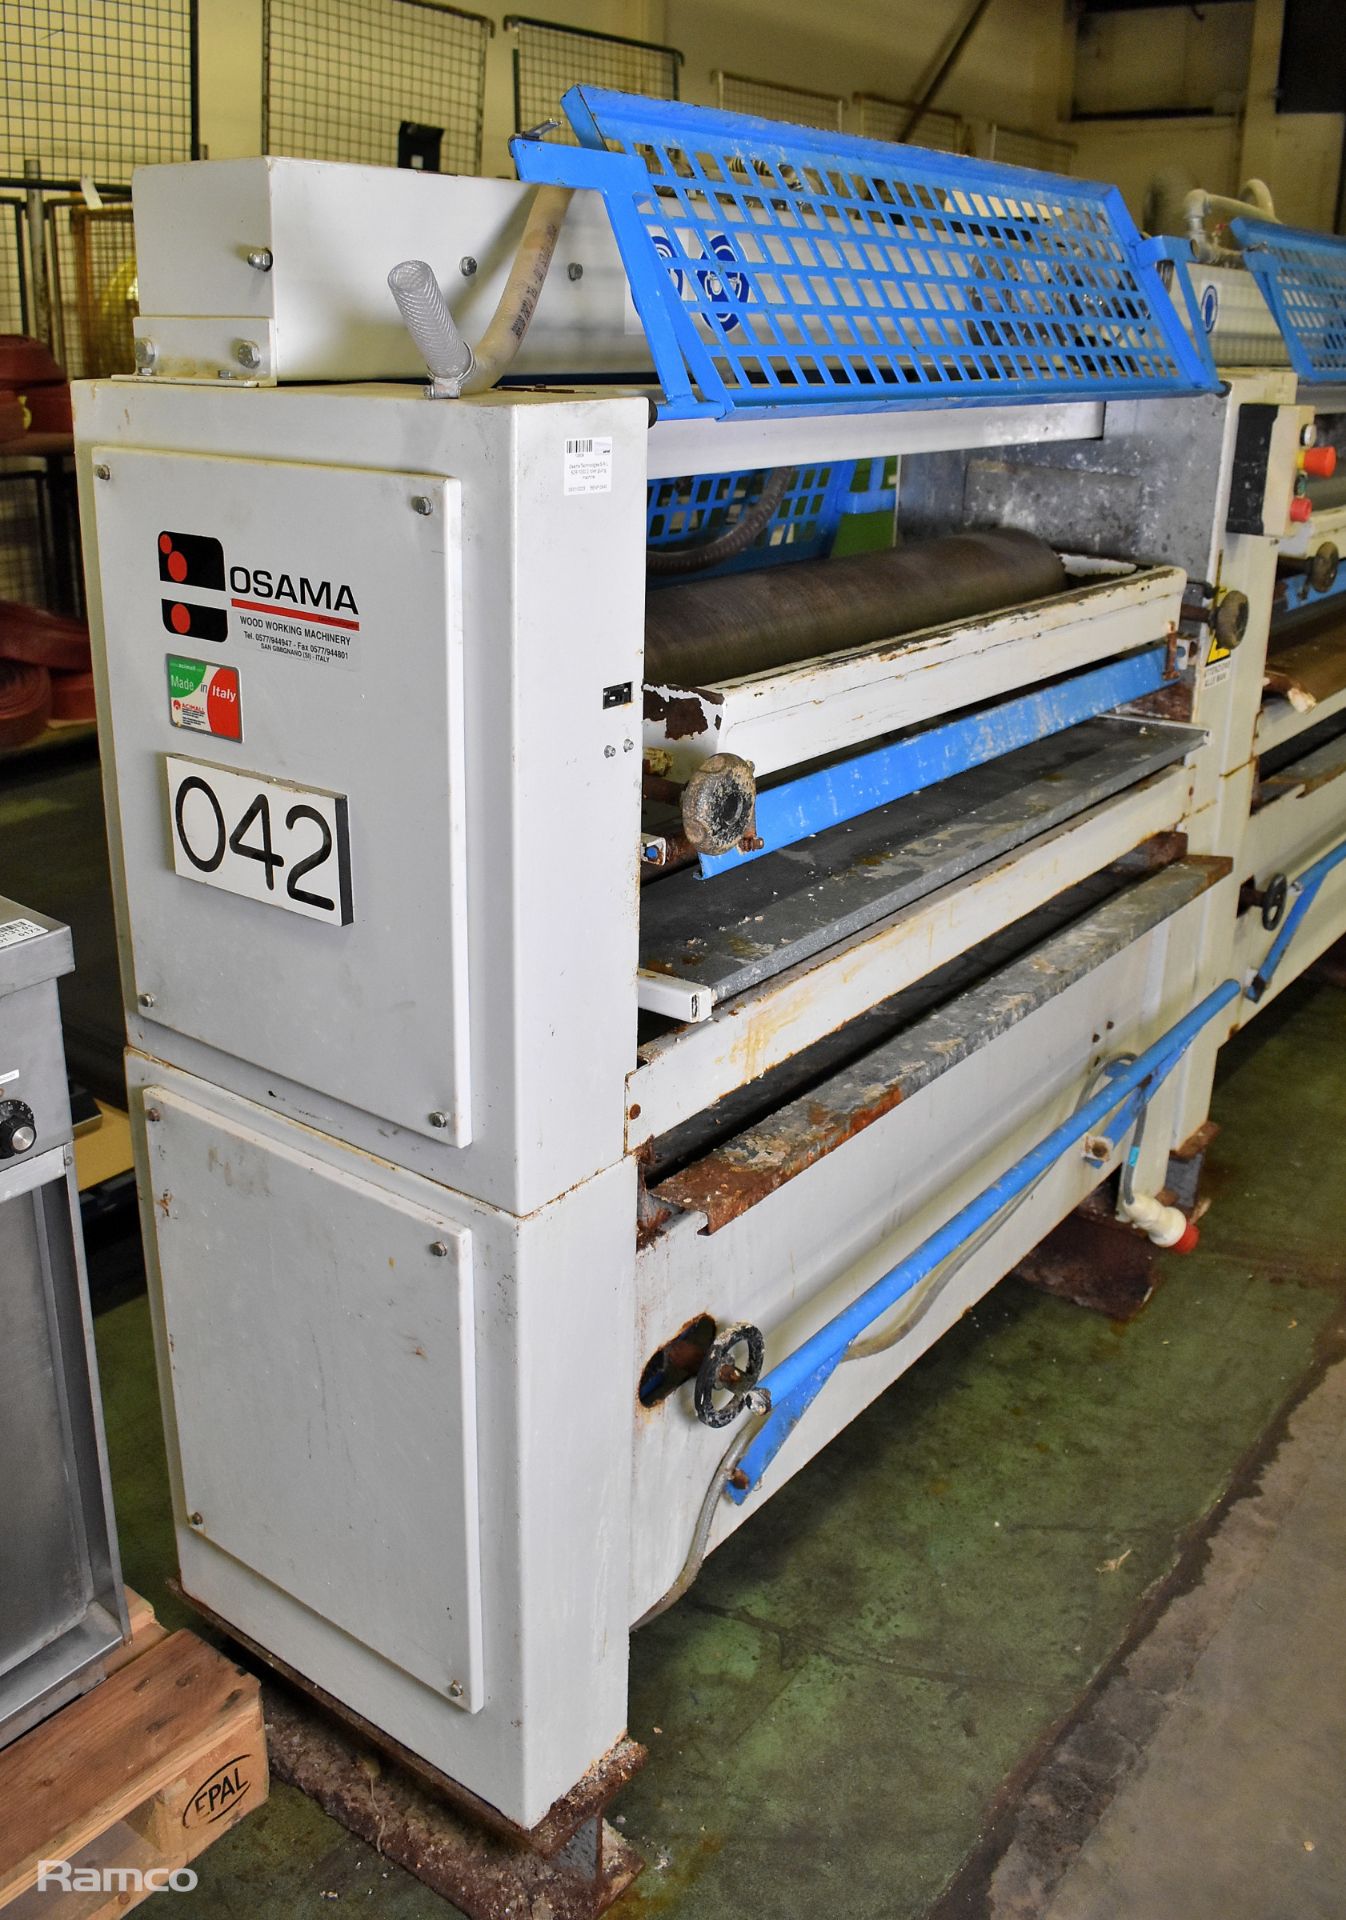 Osama Technologies S.R.L S2R-1000 2 roller gluing machine - no information plate - Image 4 of 5